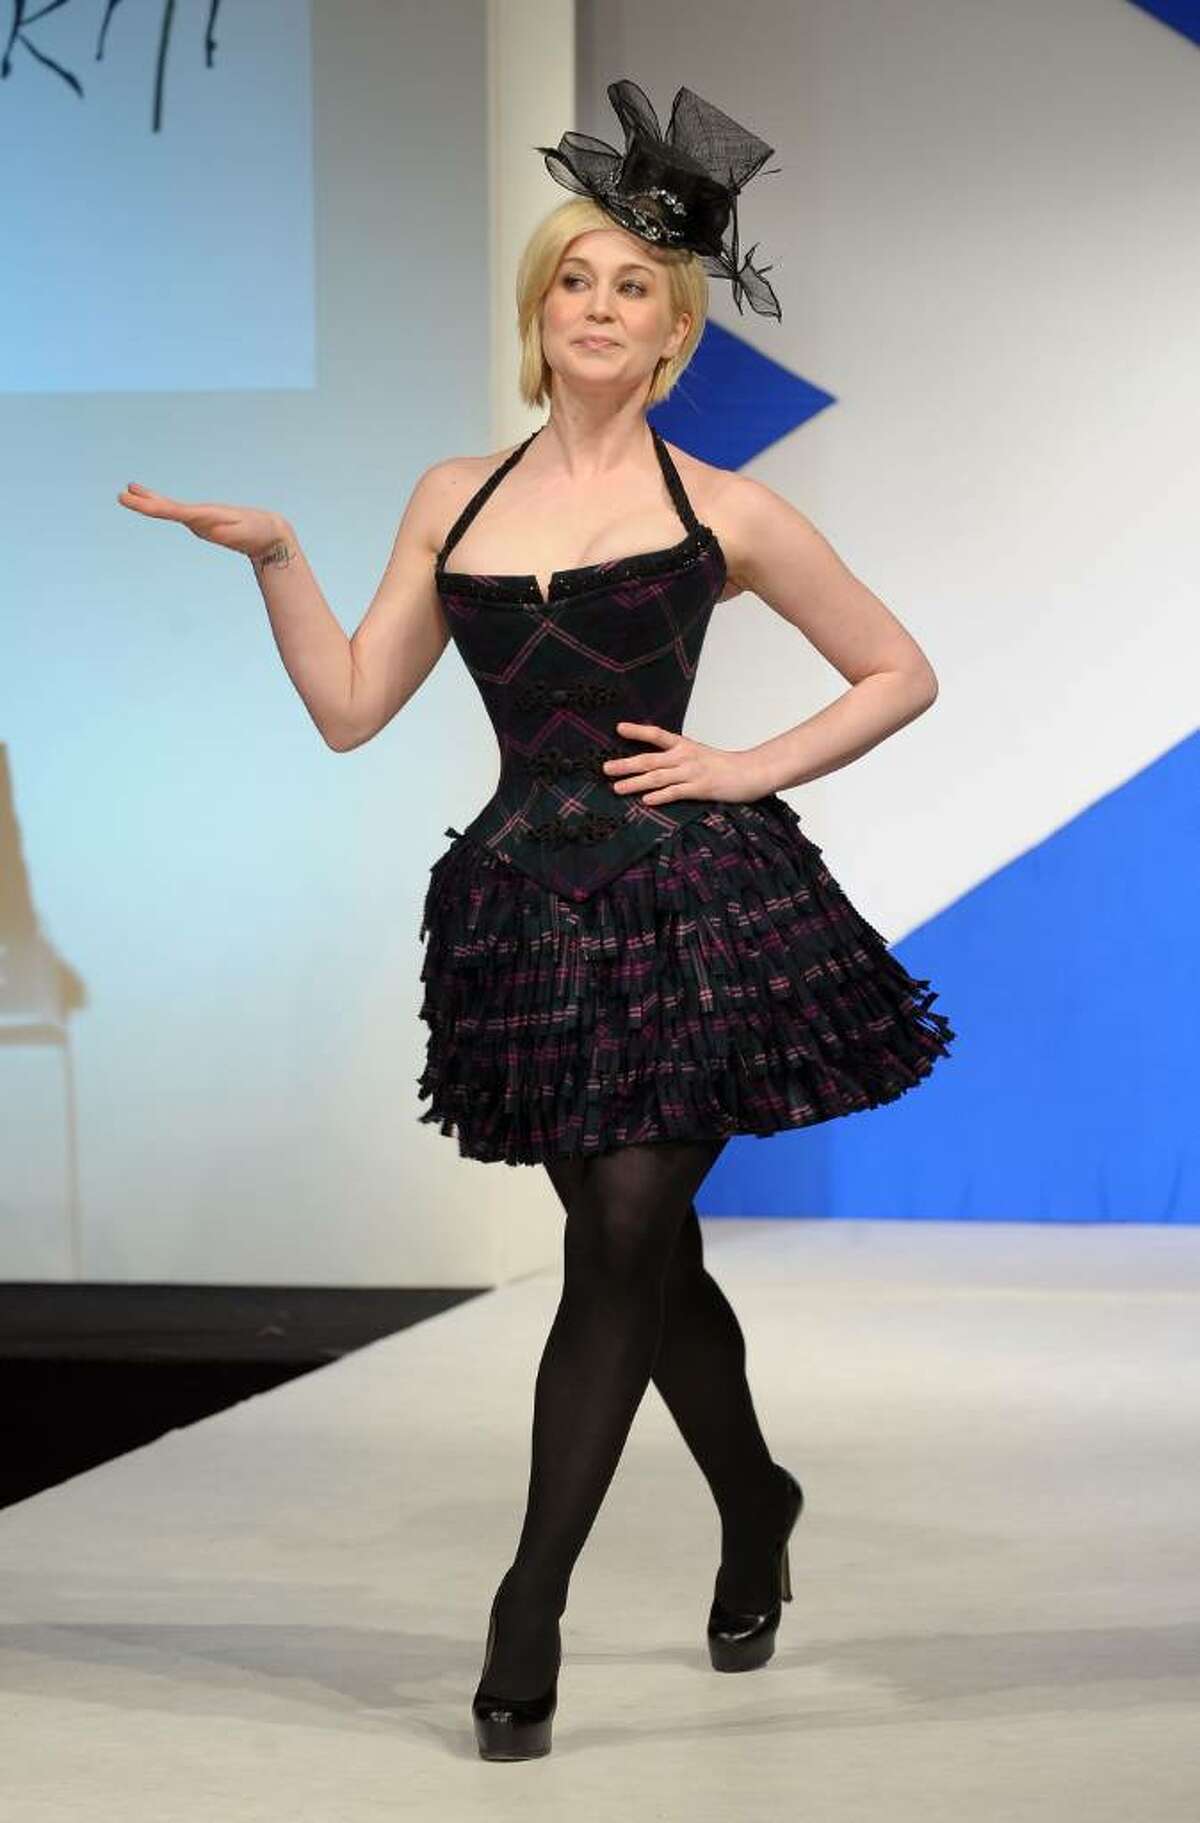 NEW YORK - APRIL 05: Singer Kellie Pickler walks the runway at the 8th annual "Dressed To Kilt" Charity Fashion Show presented by Glenfiddich at M2 Ultra Lounge on April 5, 2010 in New York City. (Photo by Andrew H. Walker/Getty Images) *** Local Caption *** Kellie Pickler